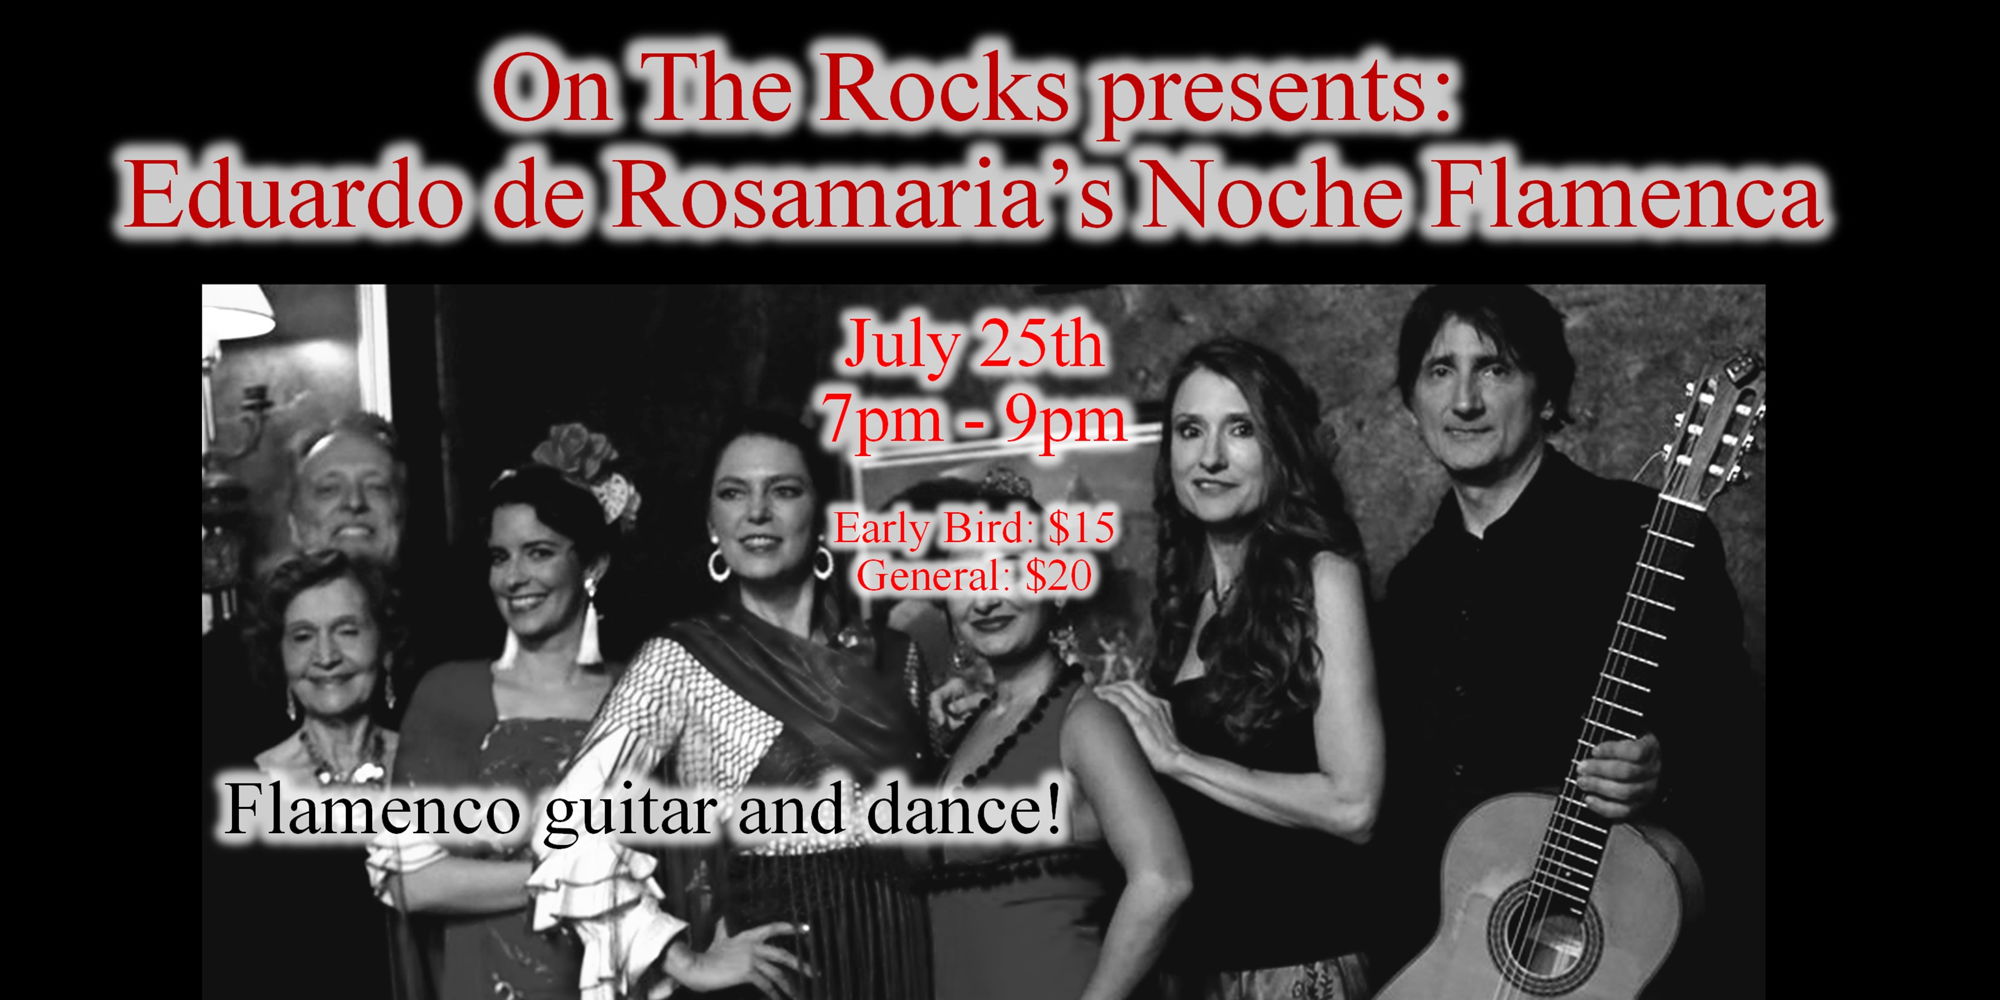 Noche Flamenca at On The Rocks promotional image